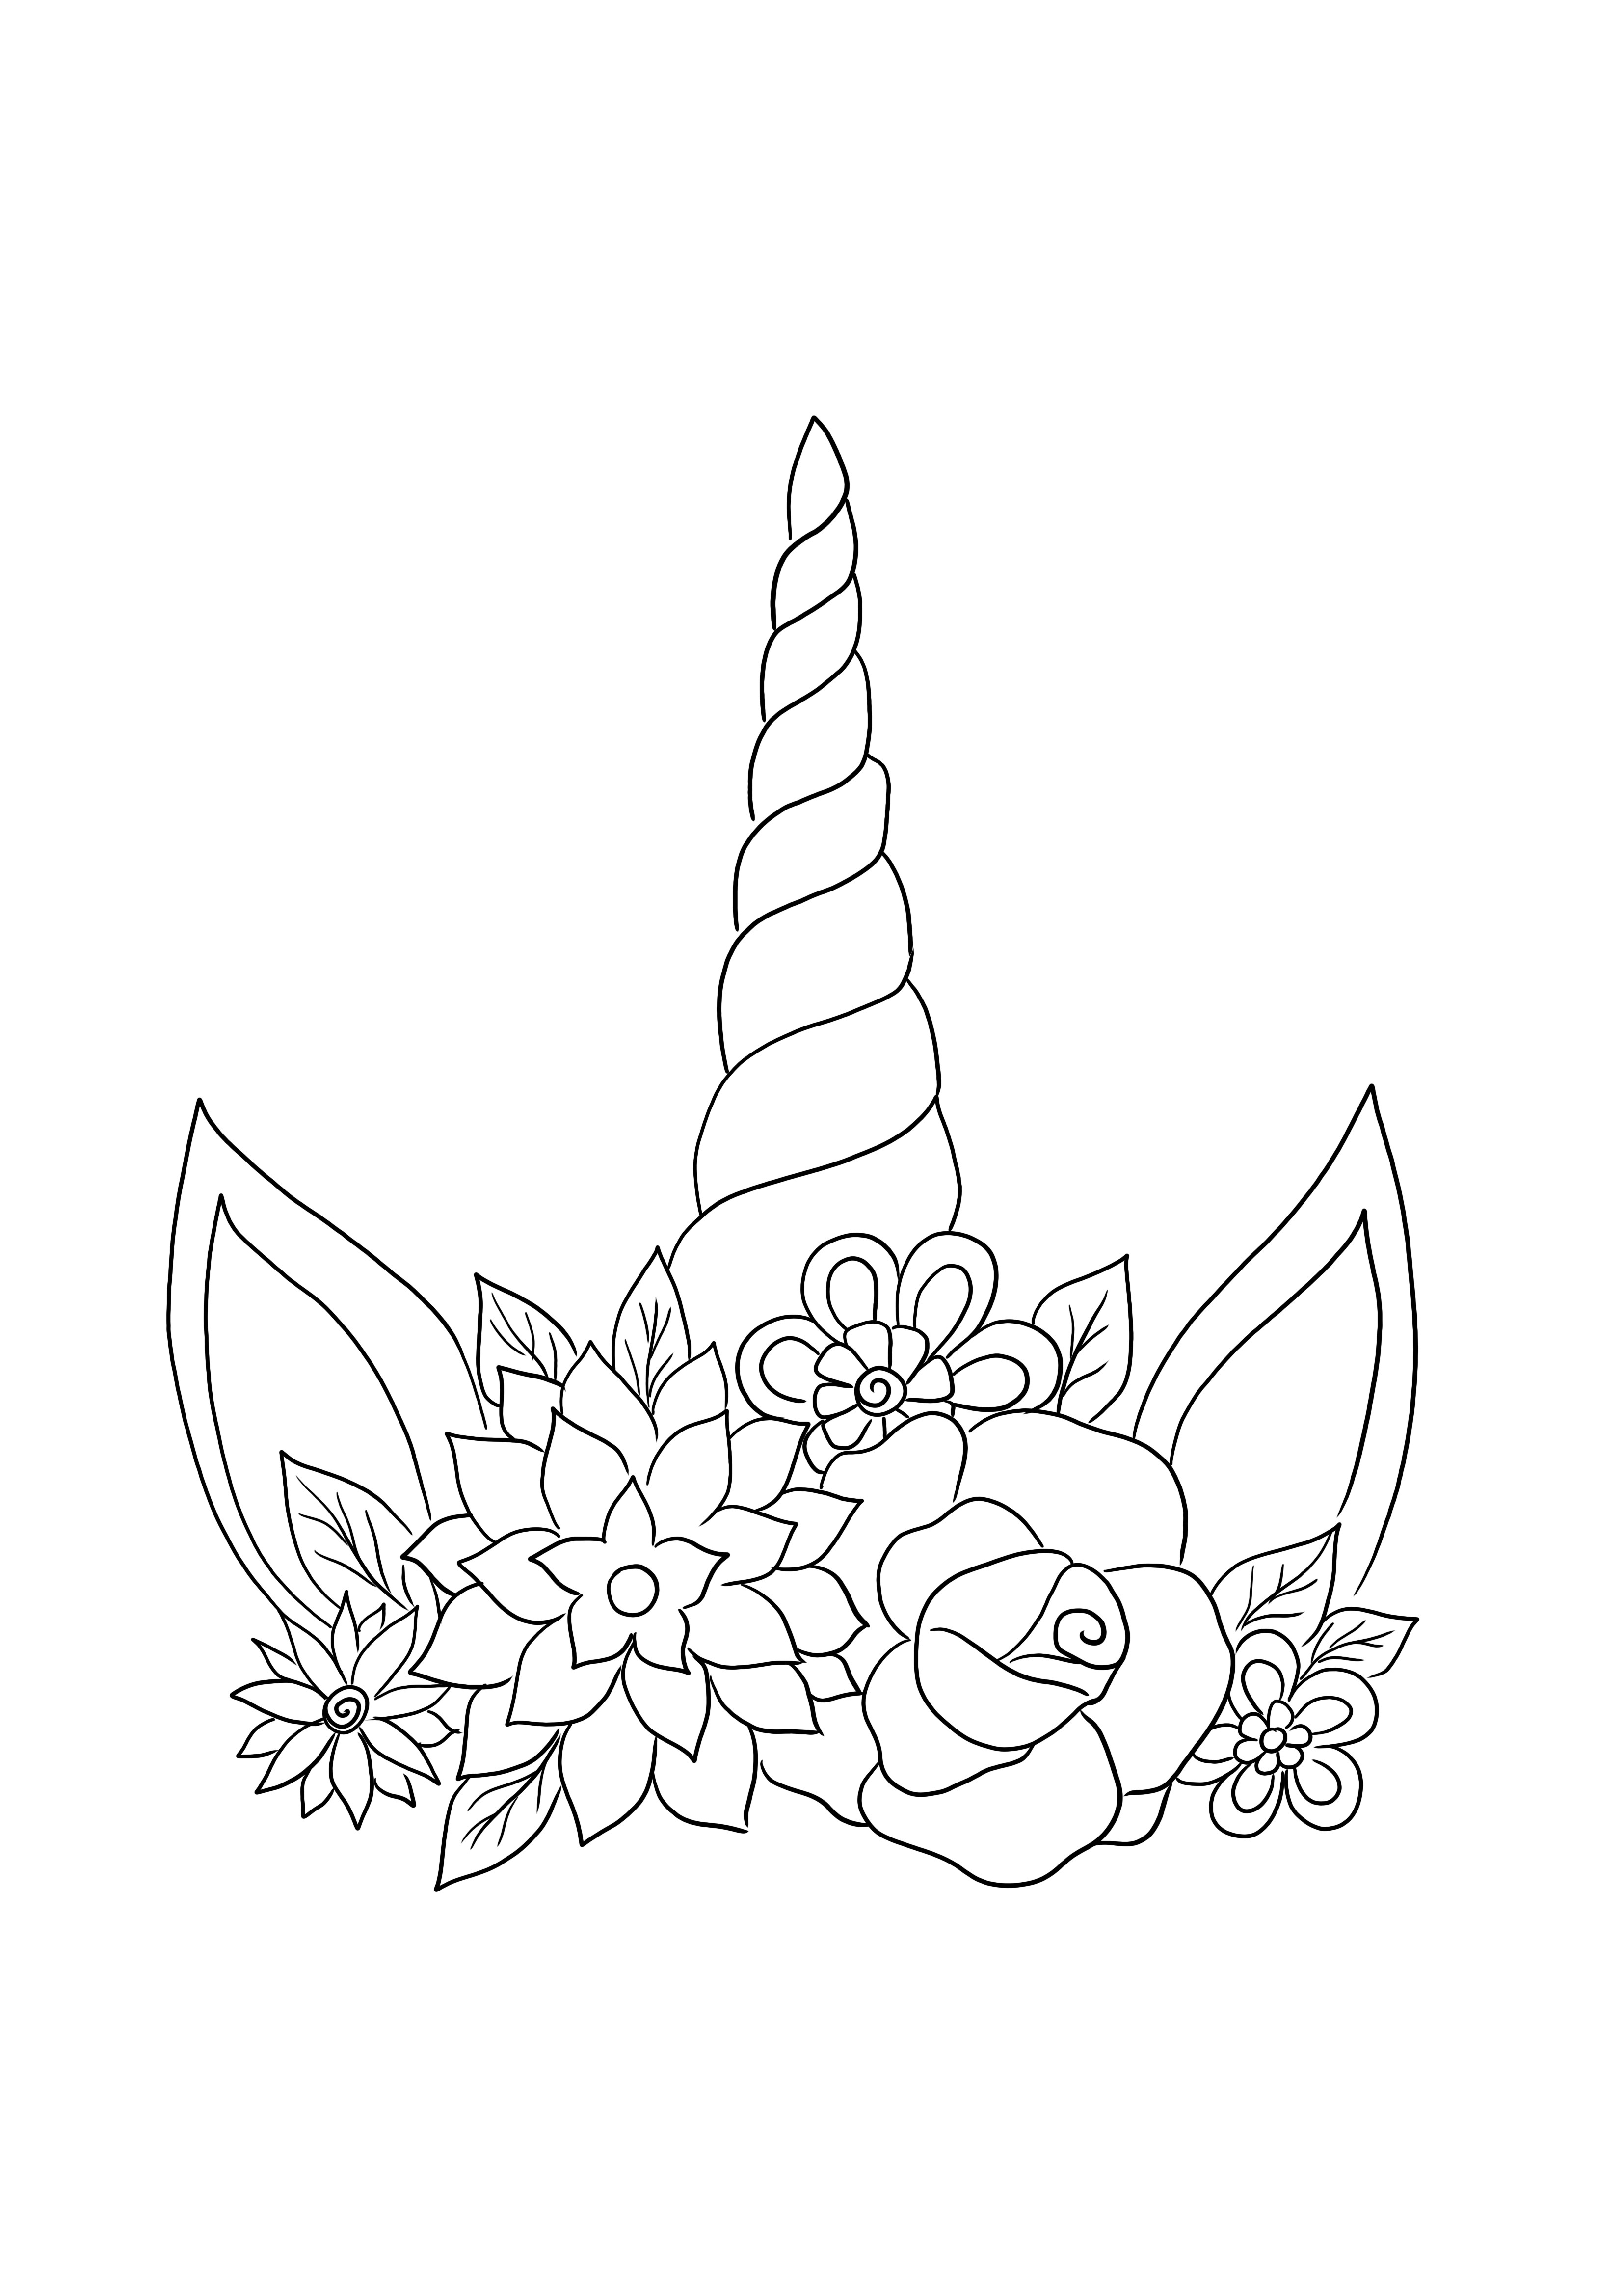 Unicorn headband free to color and download easily for Unicorn lovers